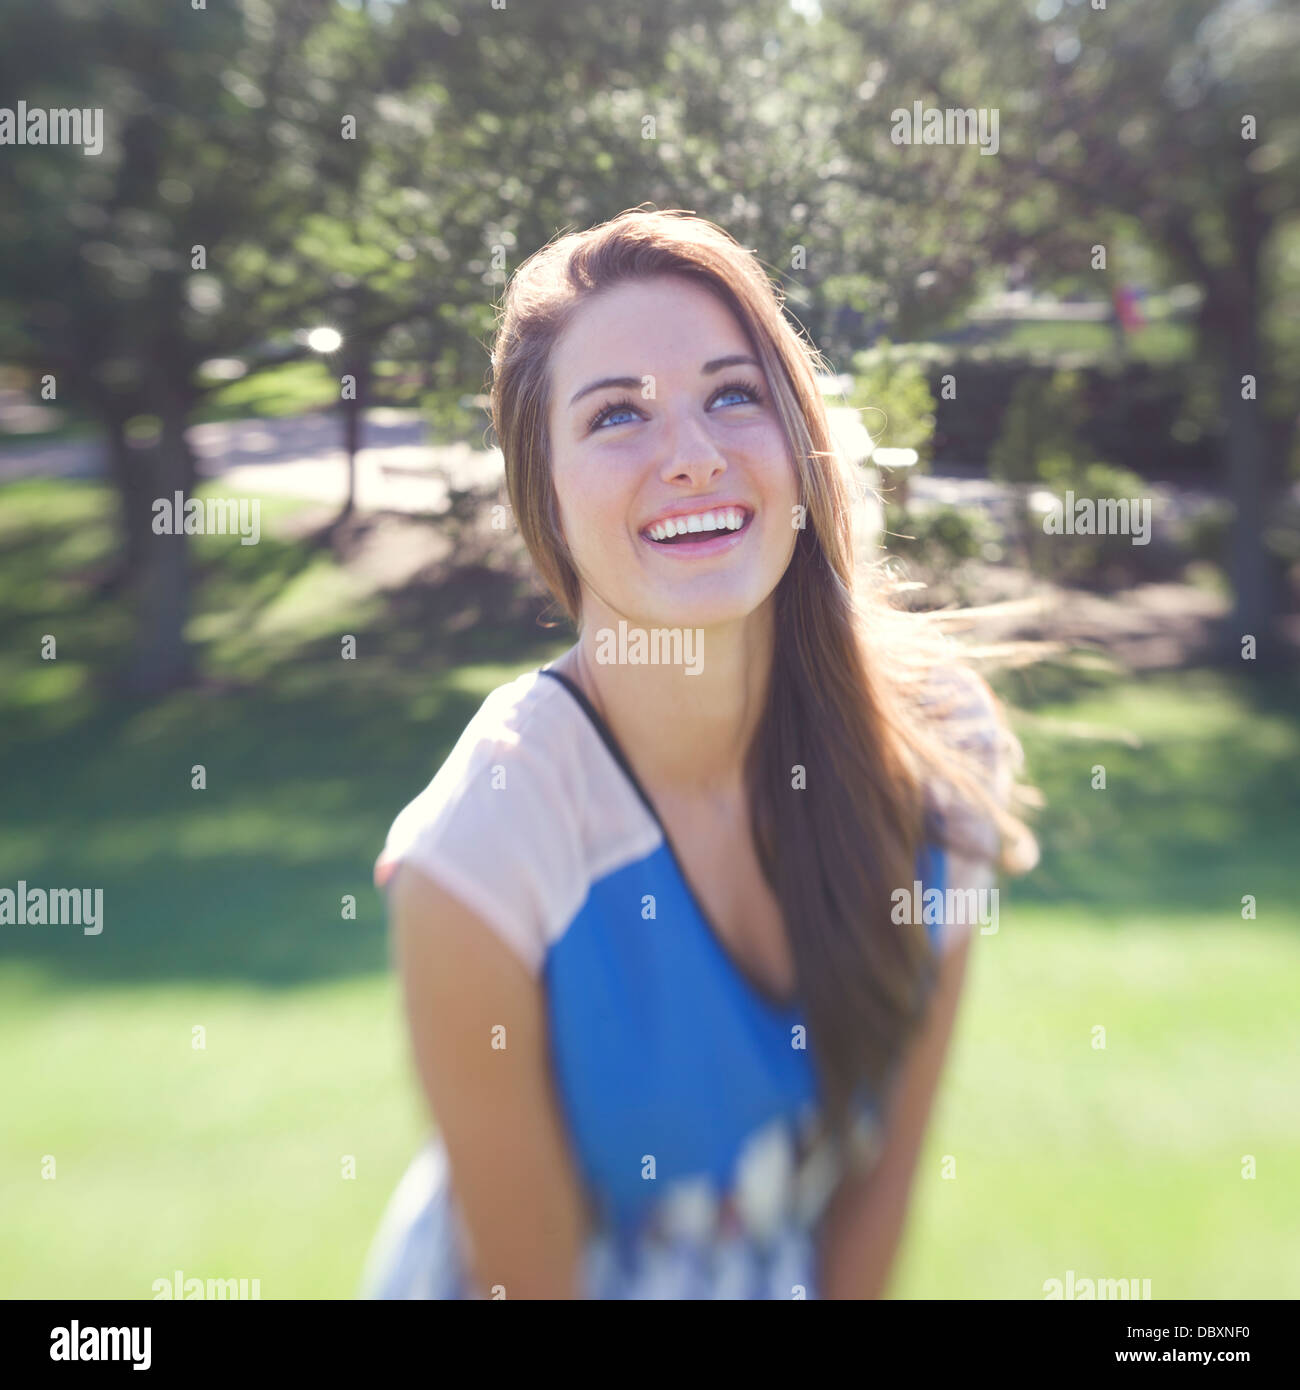 Young woman smiling while outside in the sun on a summer day. Stock Photo